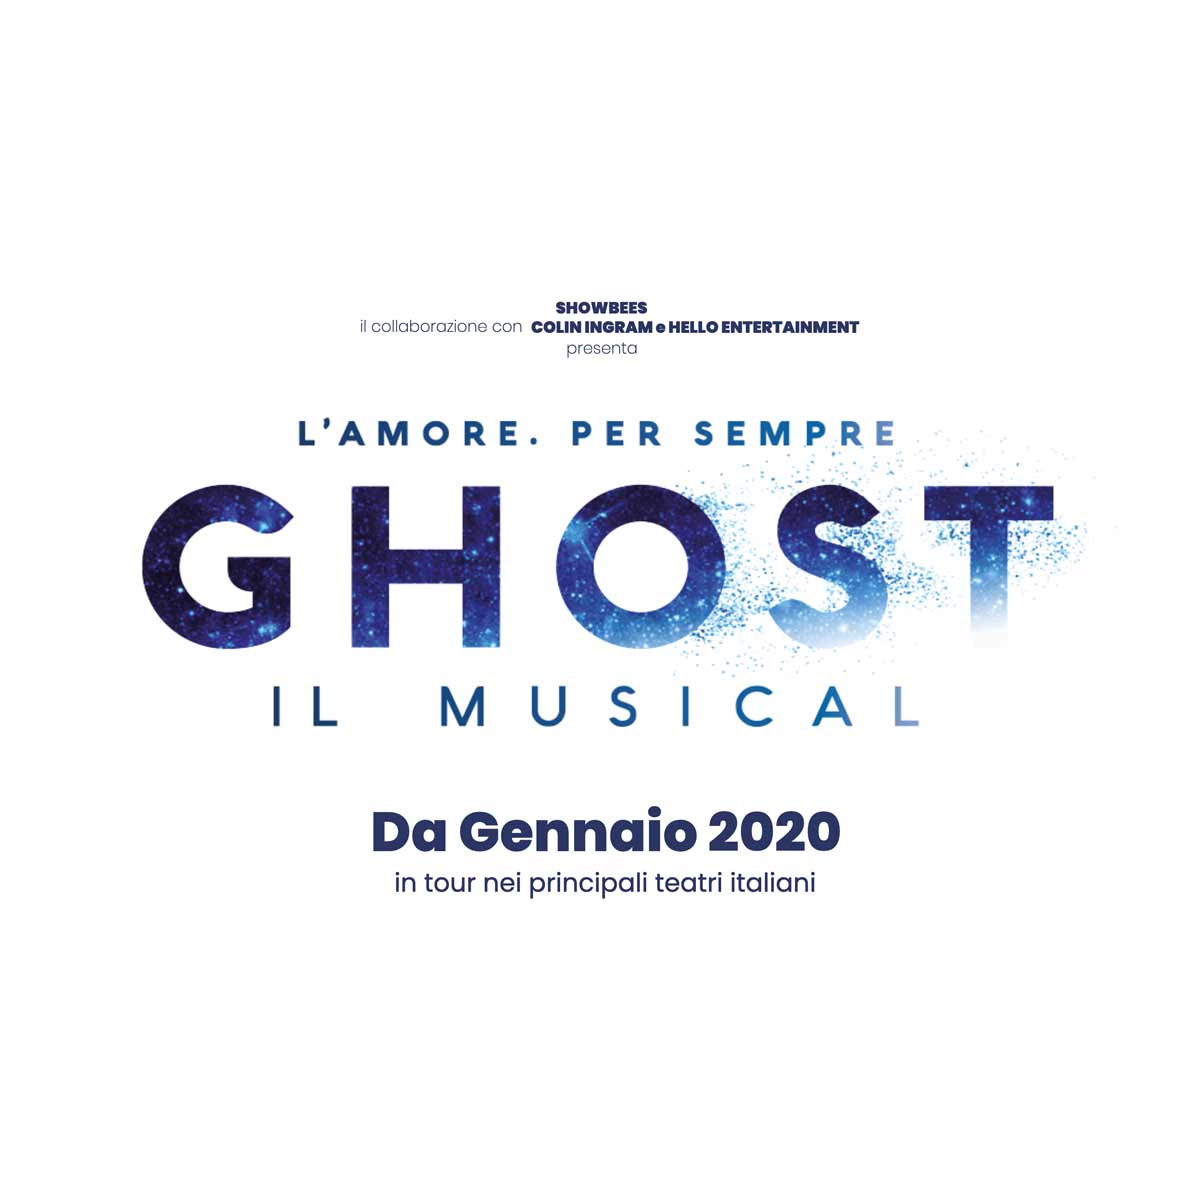 Ghost il Musical